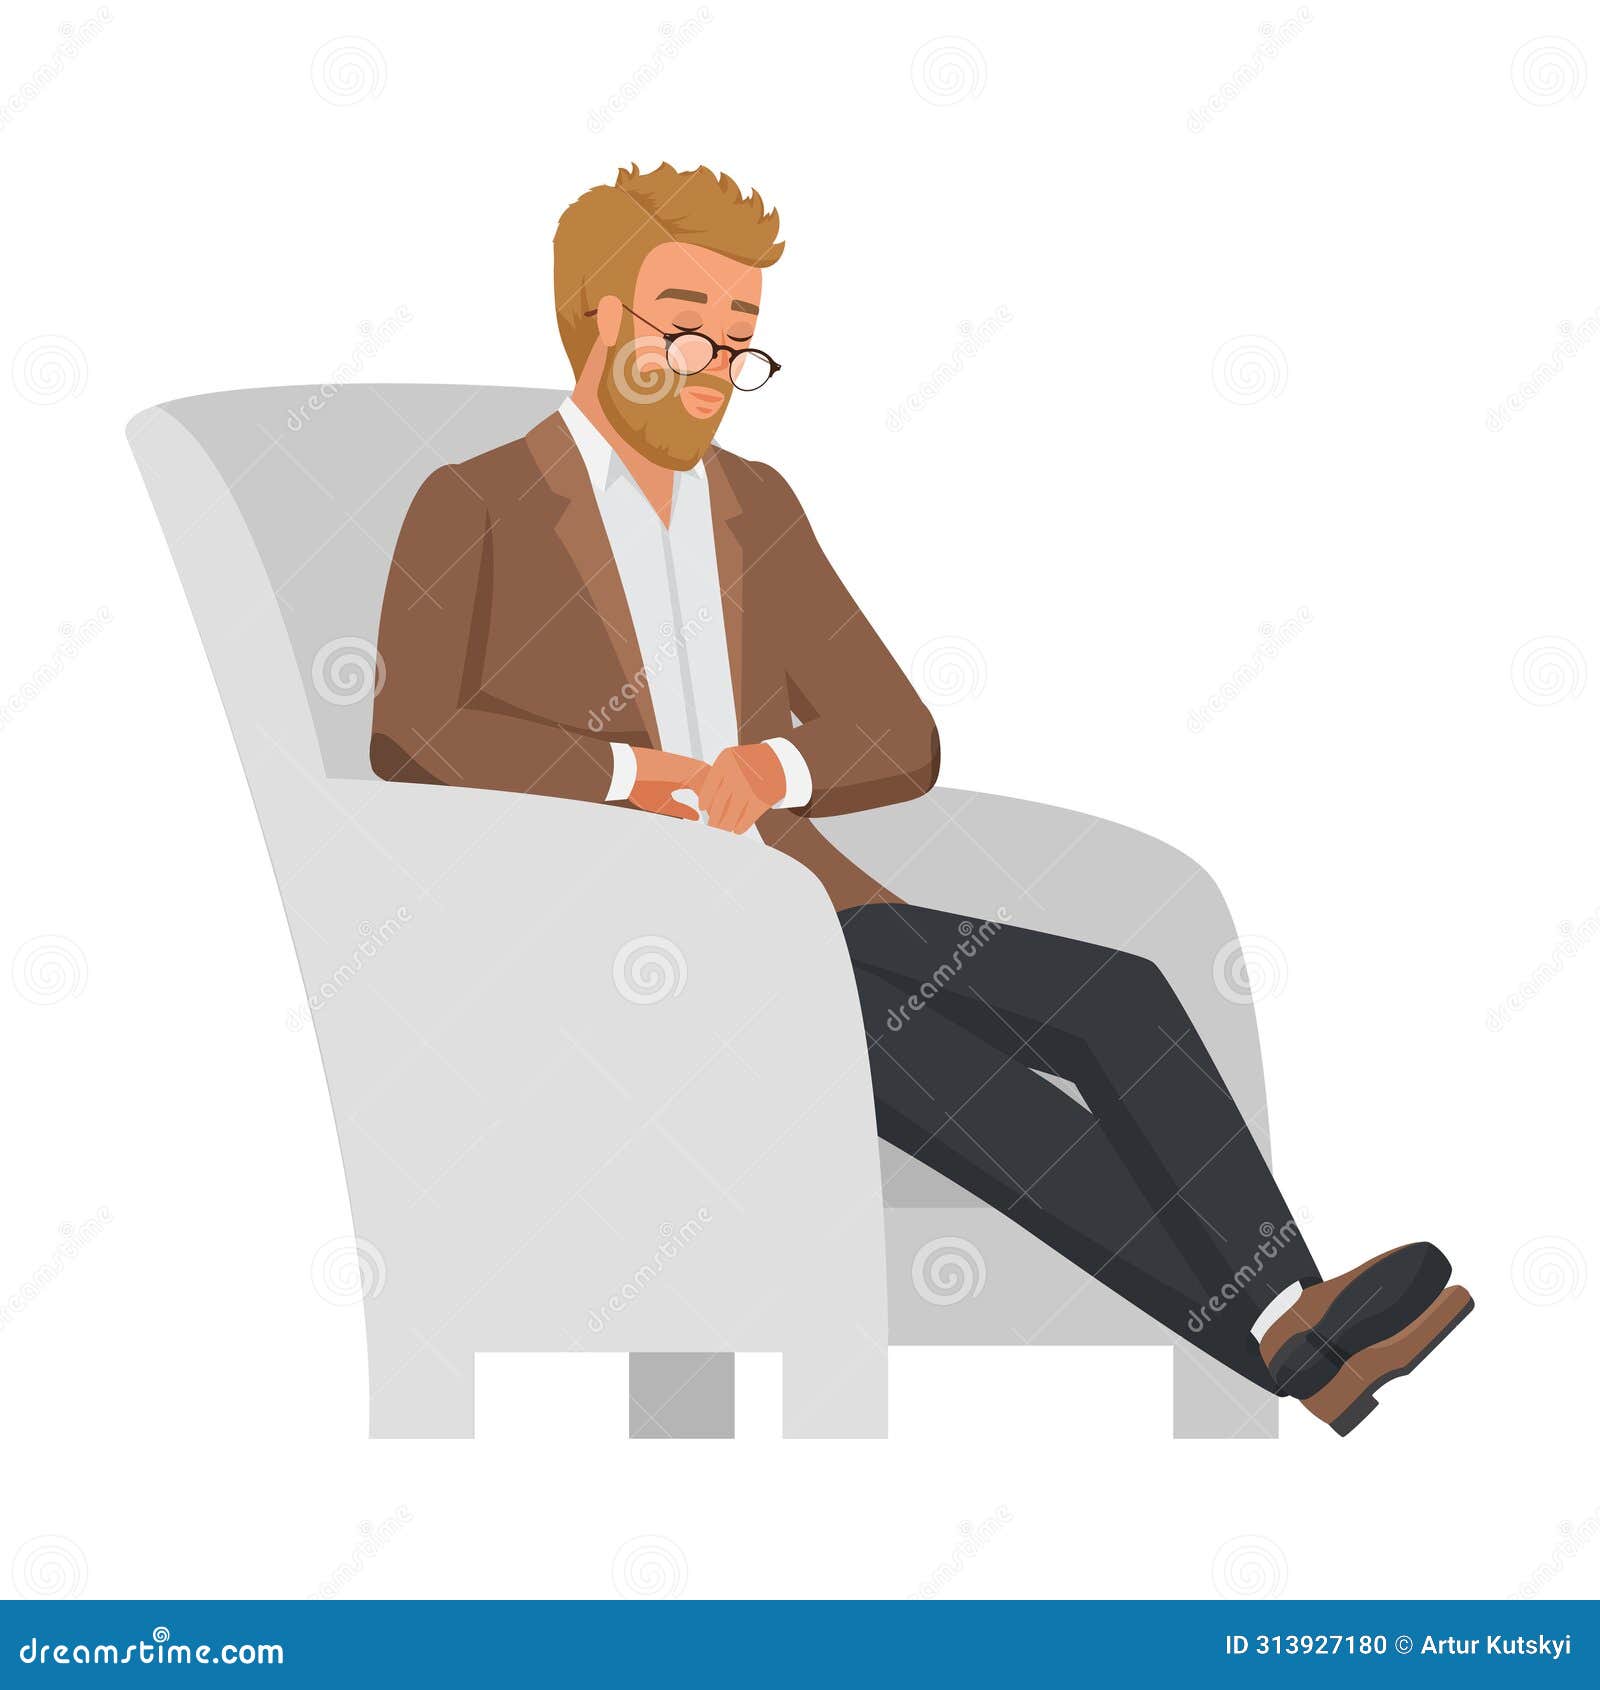 teacher sitting in chair to relax during break between lectures, lessons at school